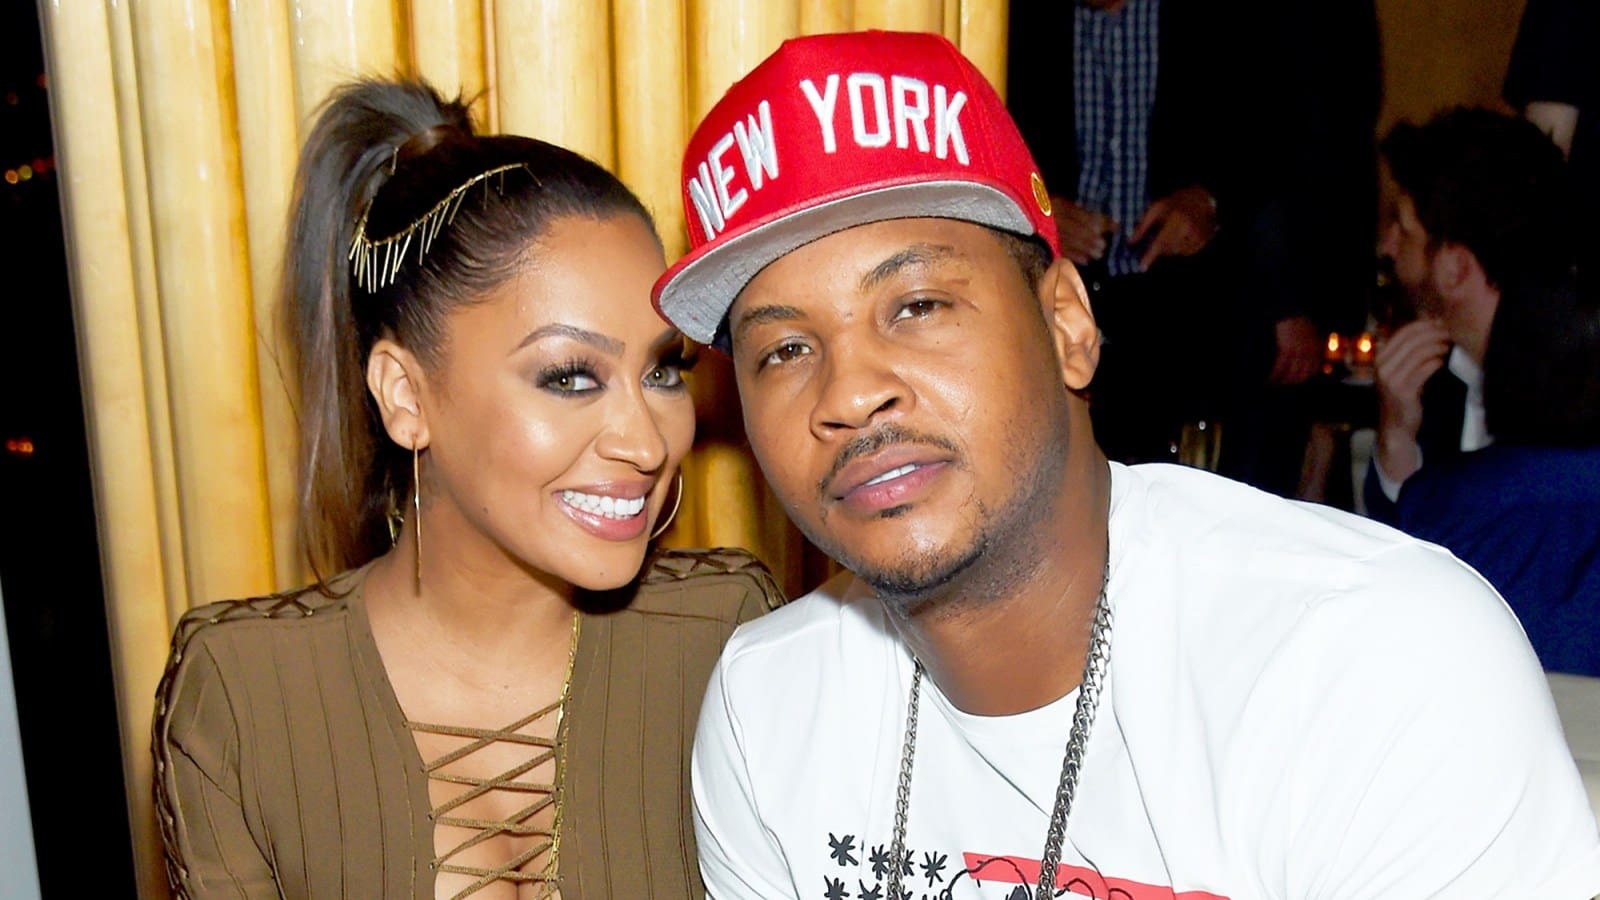 La La Anthony Confirms She's Making Moves To Be Legally Separated From Carmelo Anthony